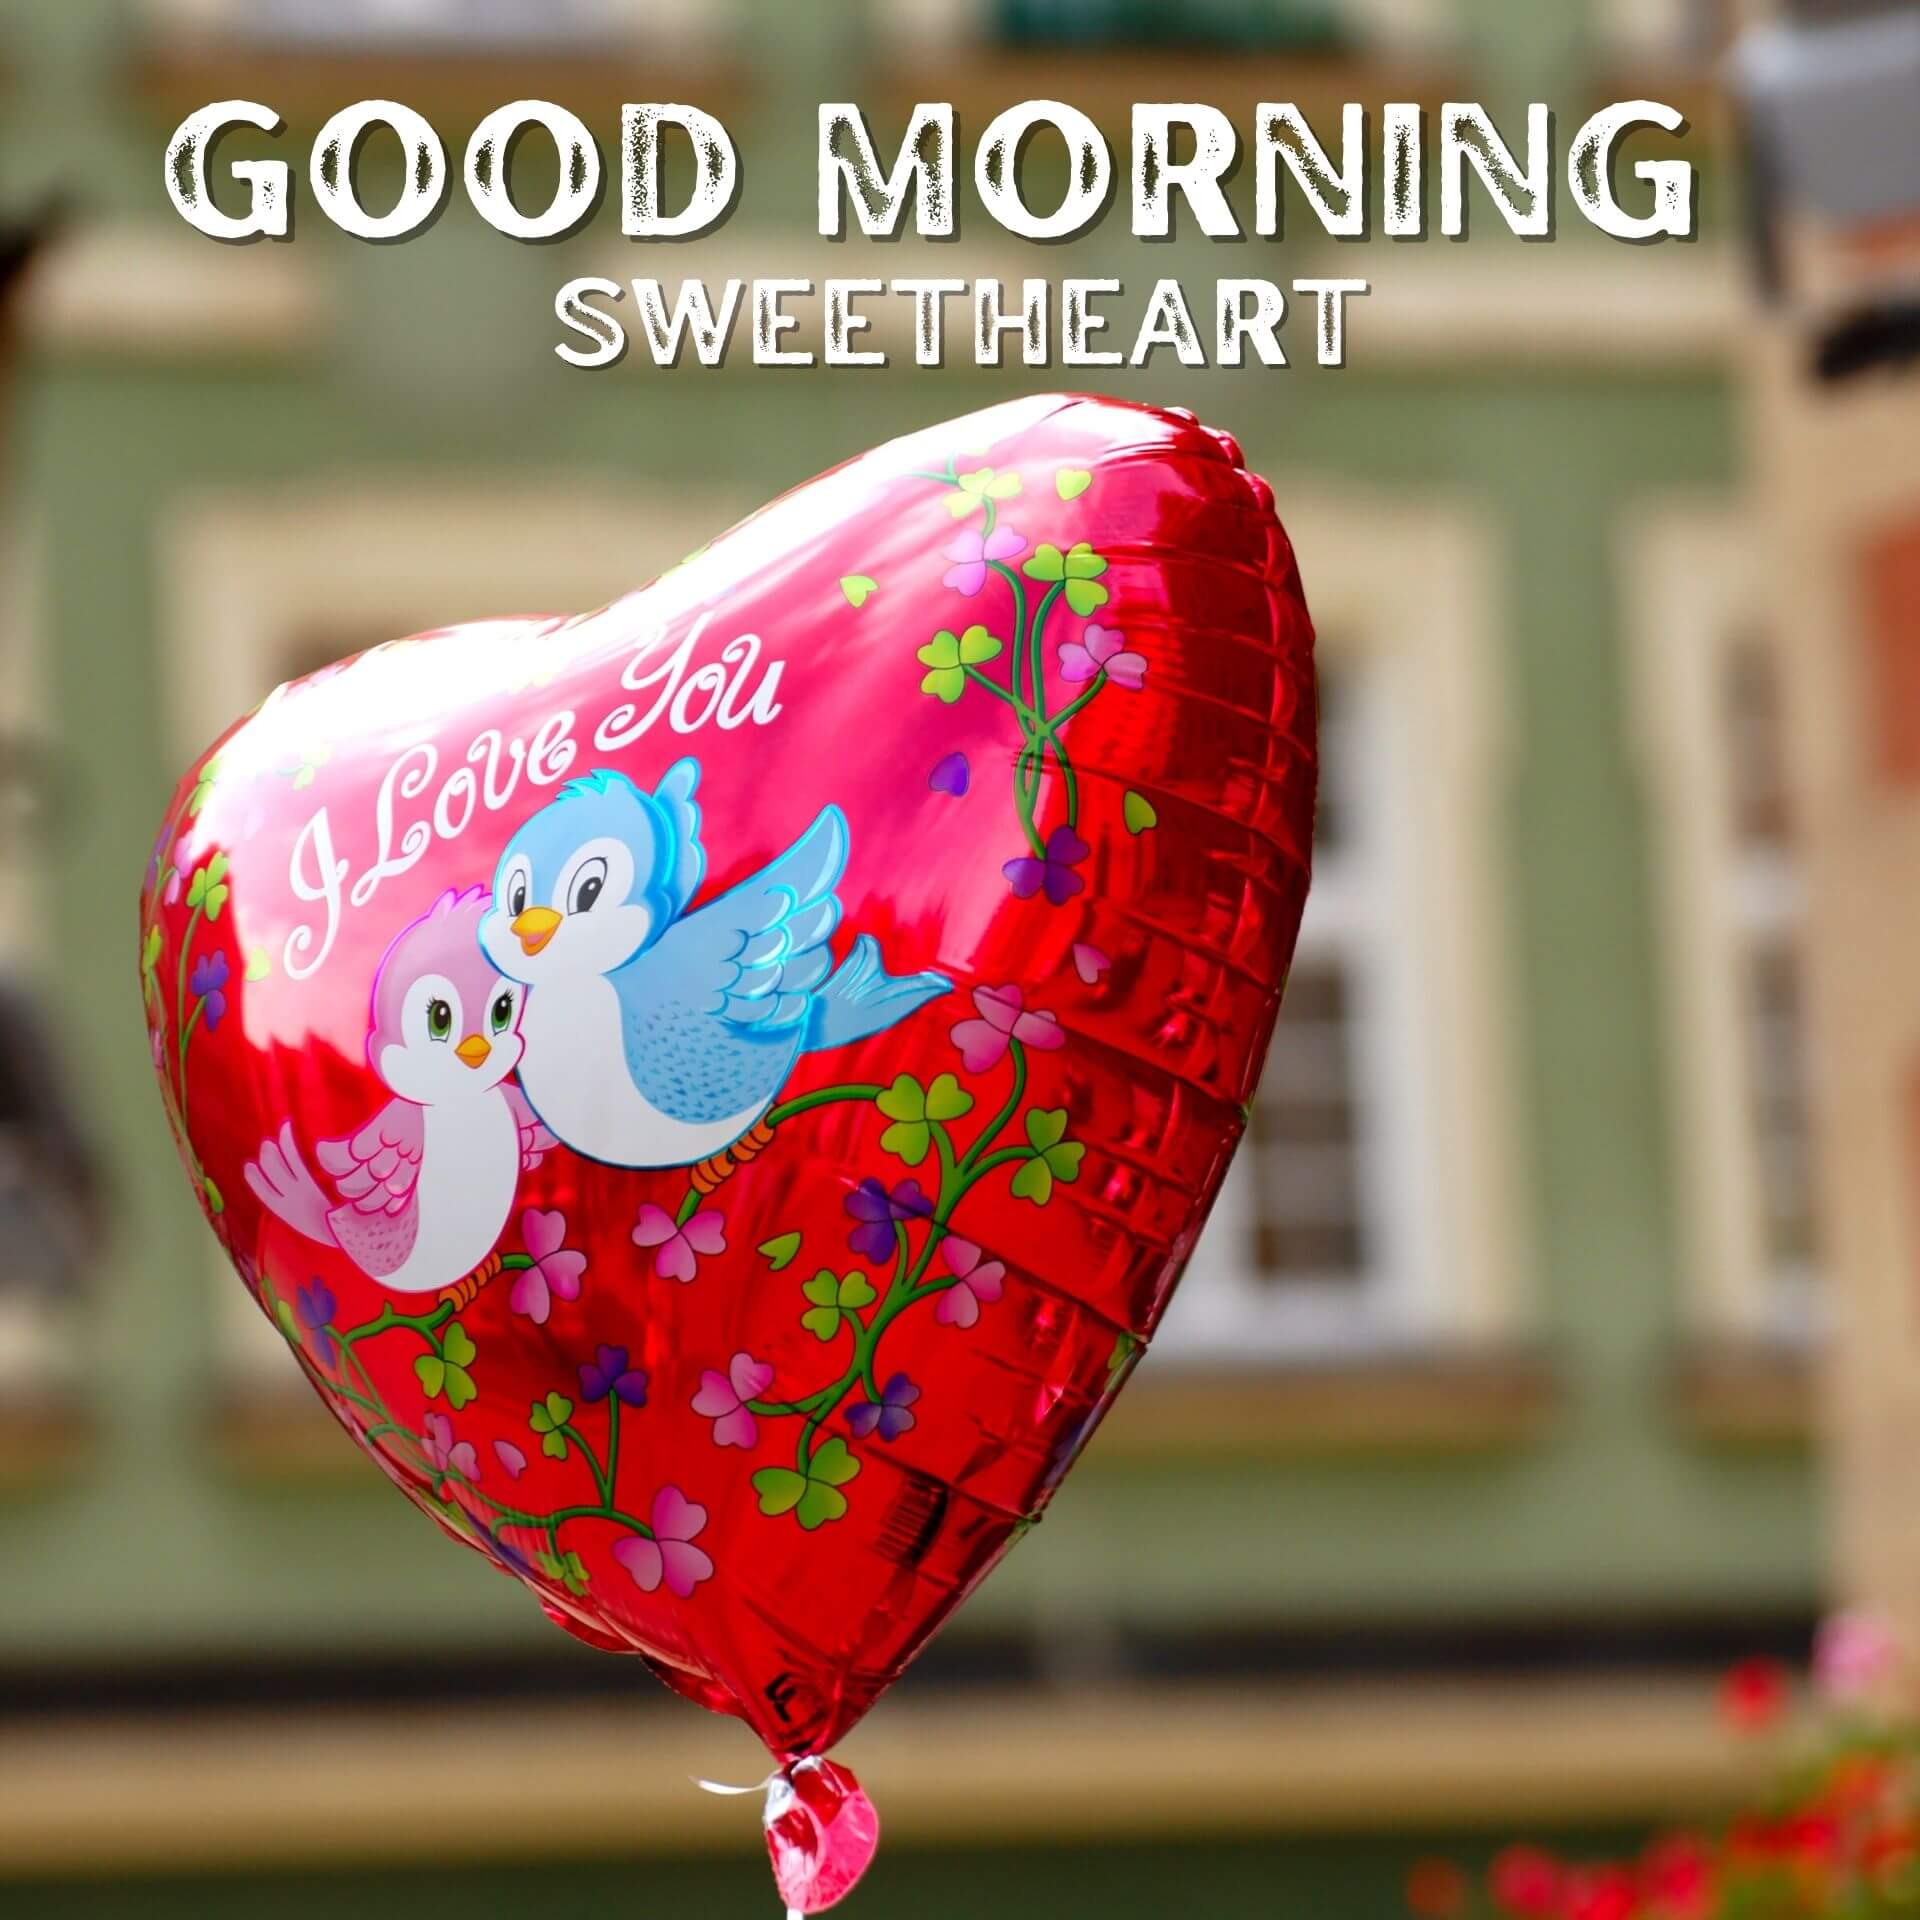 New HD Romantic Good Morning Images Download